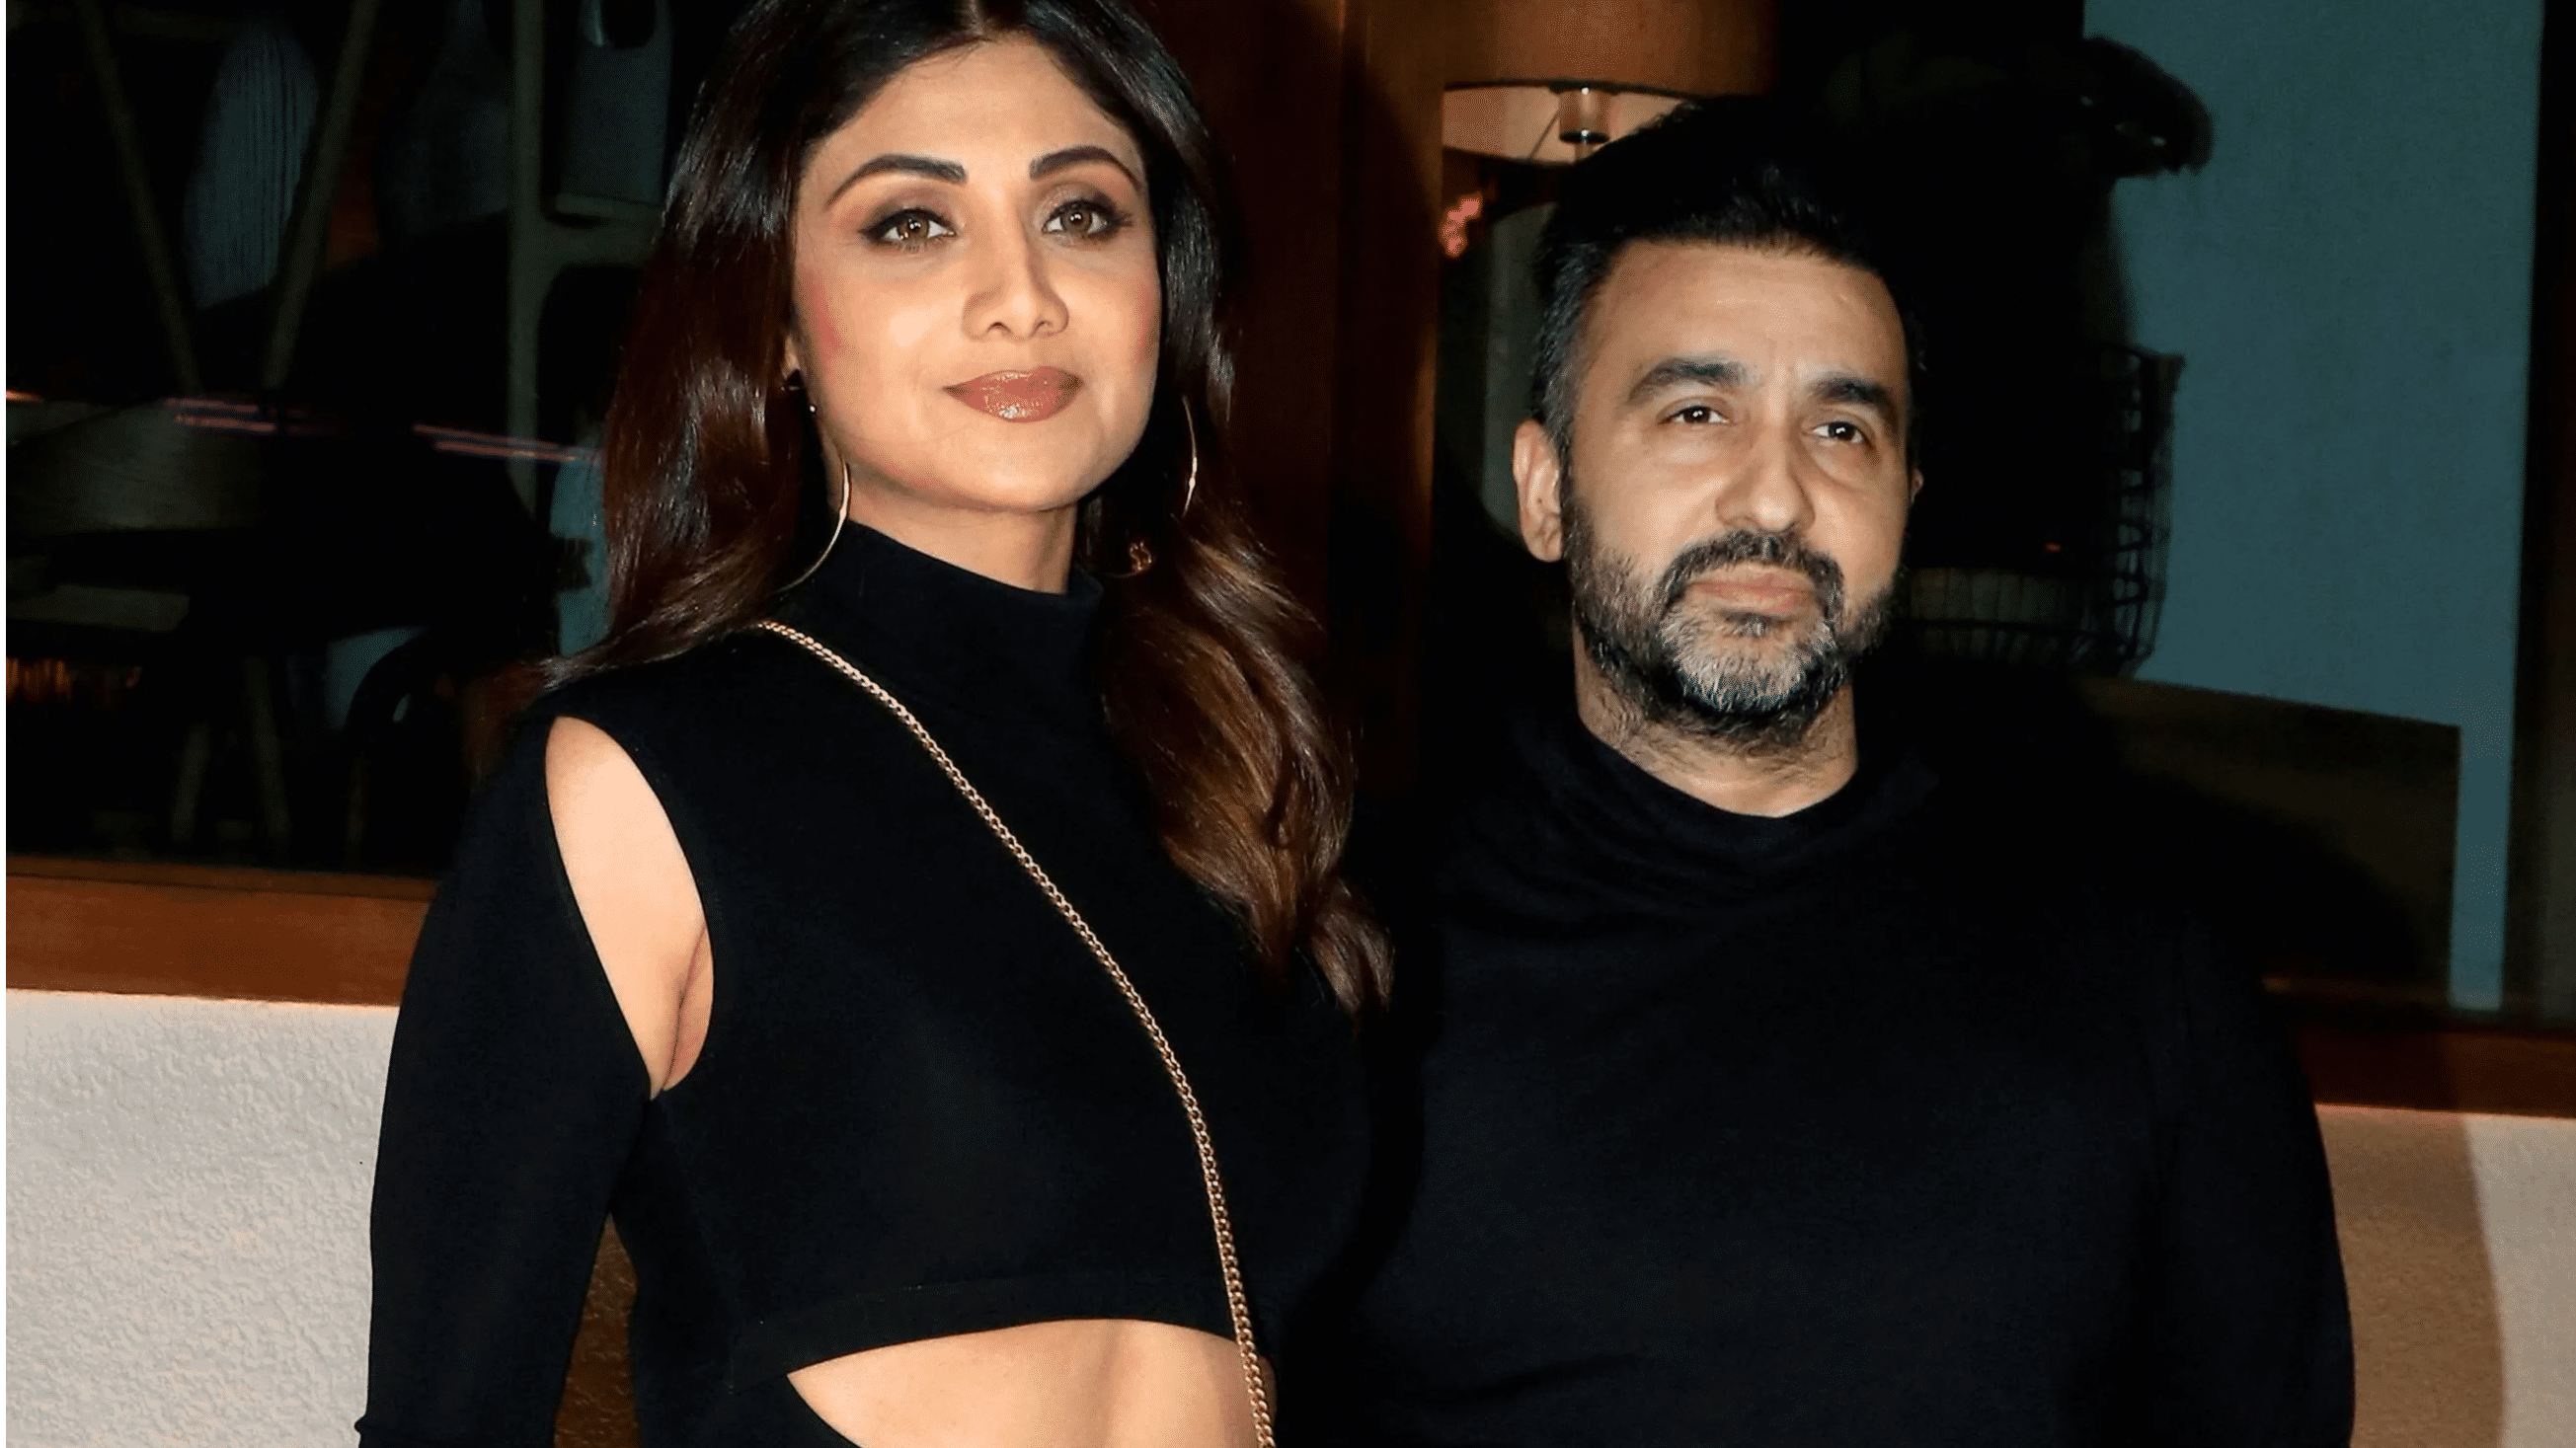 Clean chit for Shilpa Shetty in husband Raj Kundra case? 10-point update